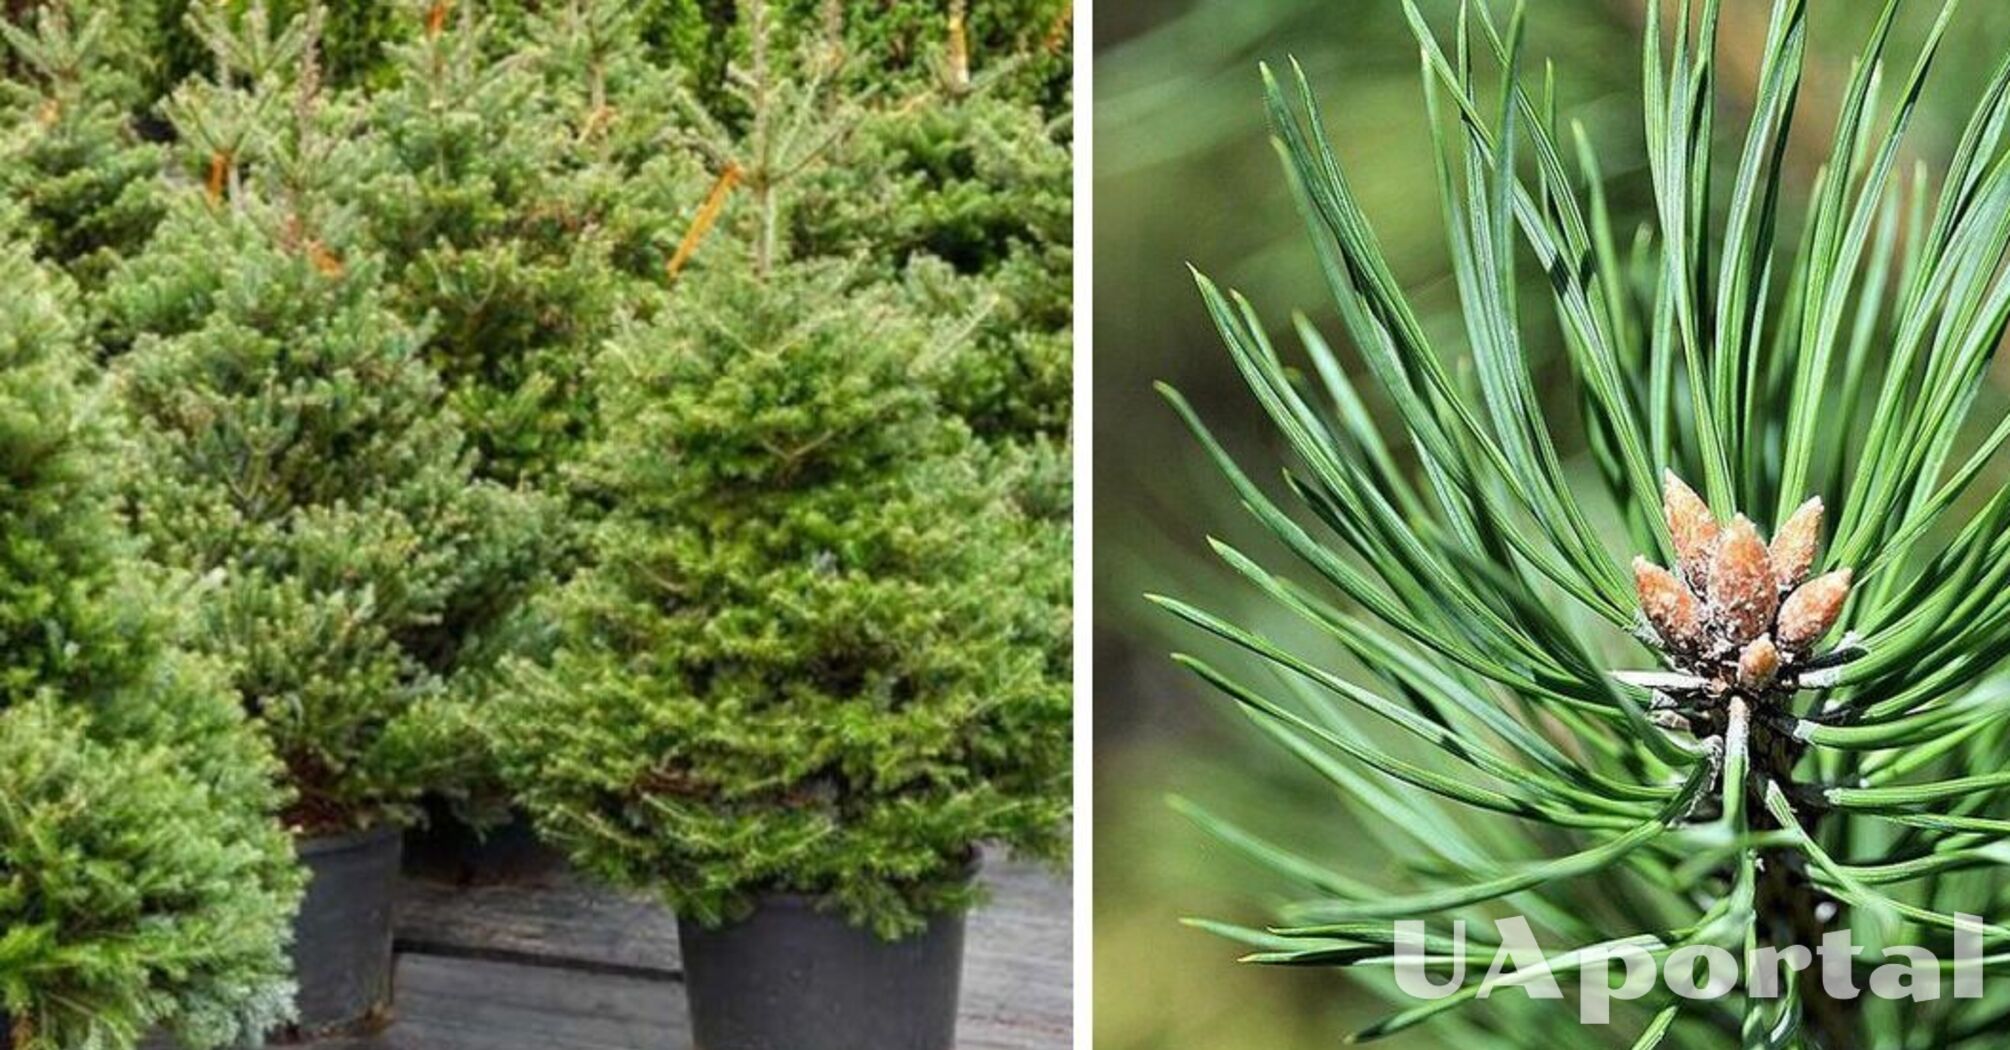 How to use a Christmas tree for the garden and vegetable garden: you will be surprised